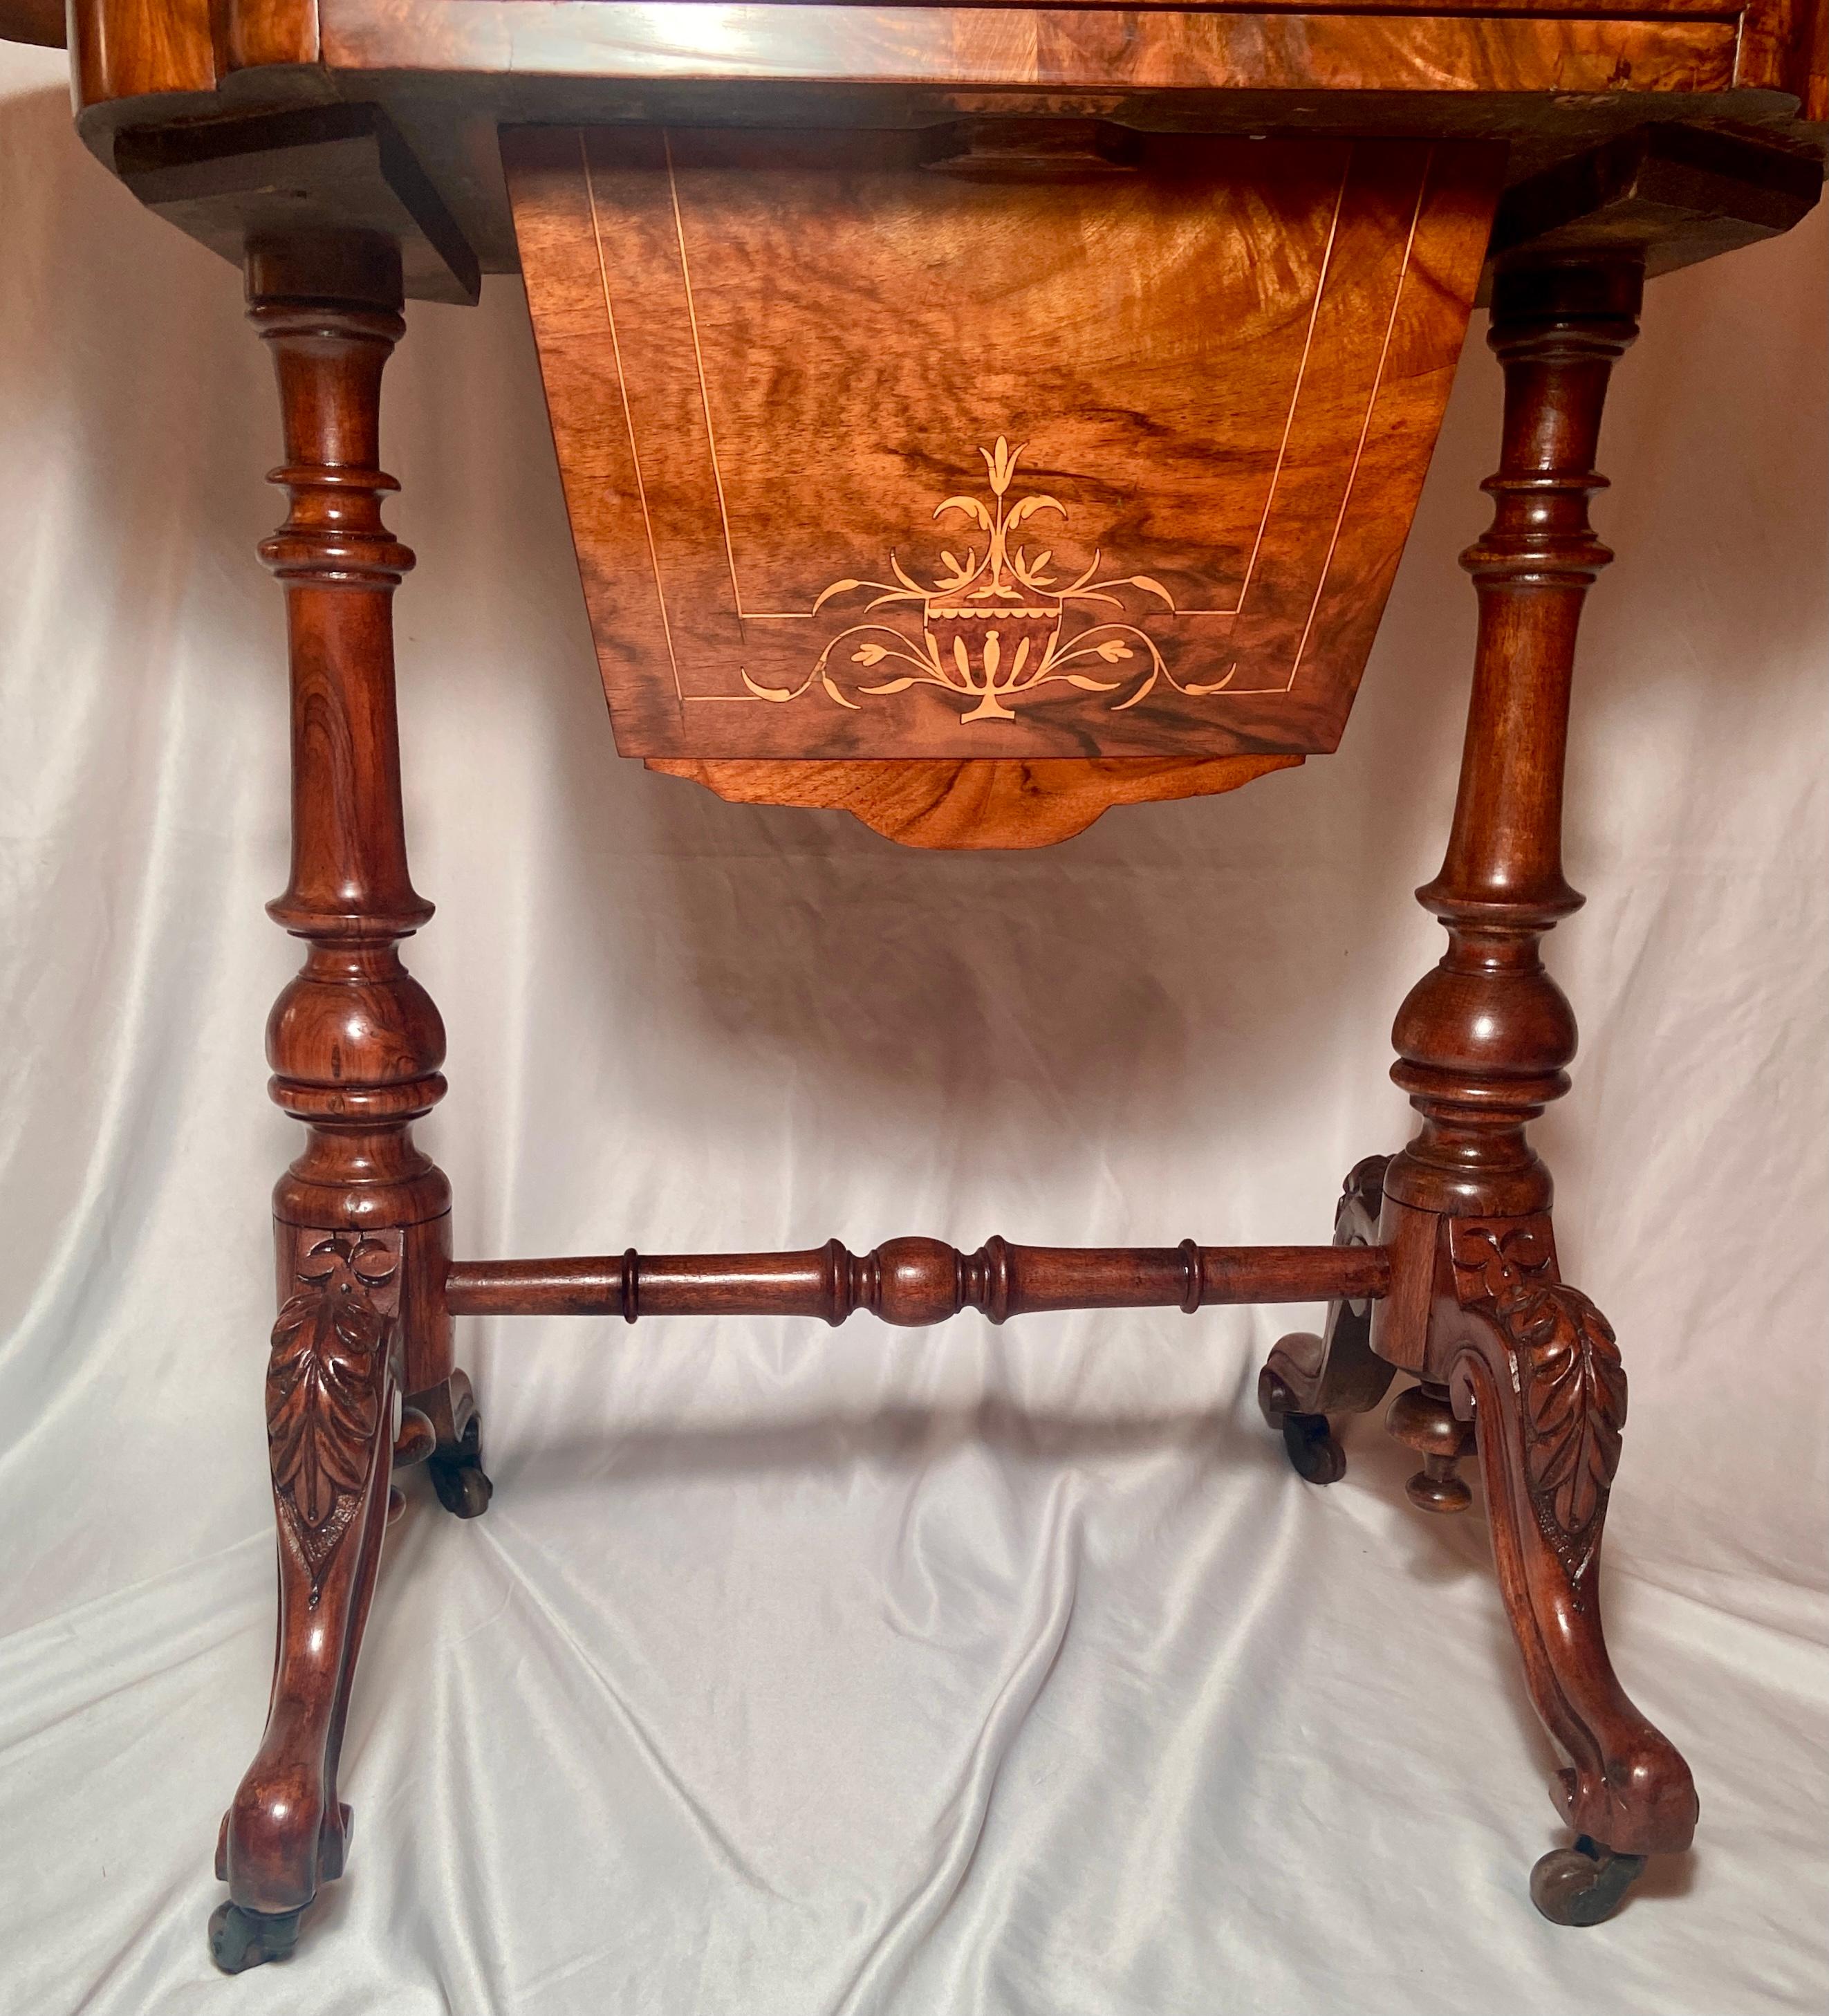 19th Century Antique English Burled Walnut Games Table with Exotic Wood Inlay, Circa 1880s. 